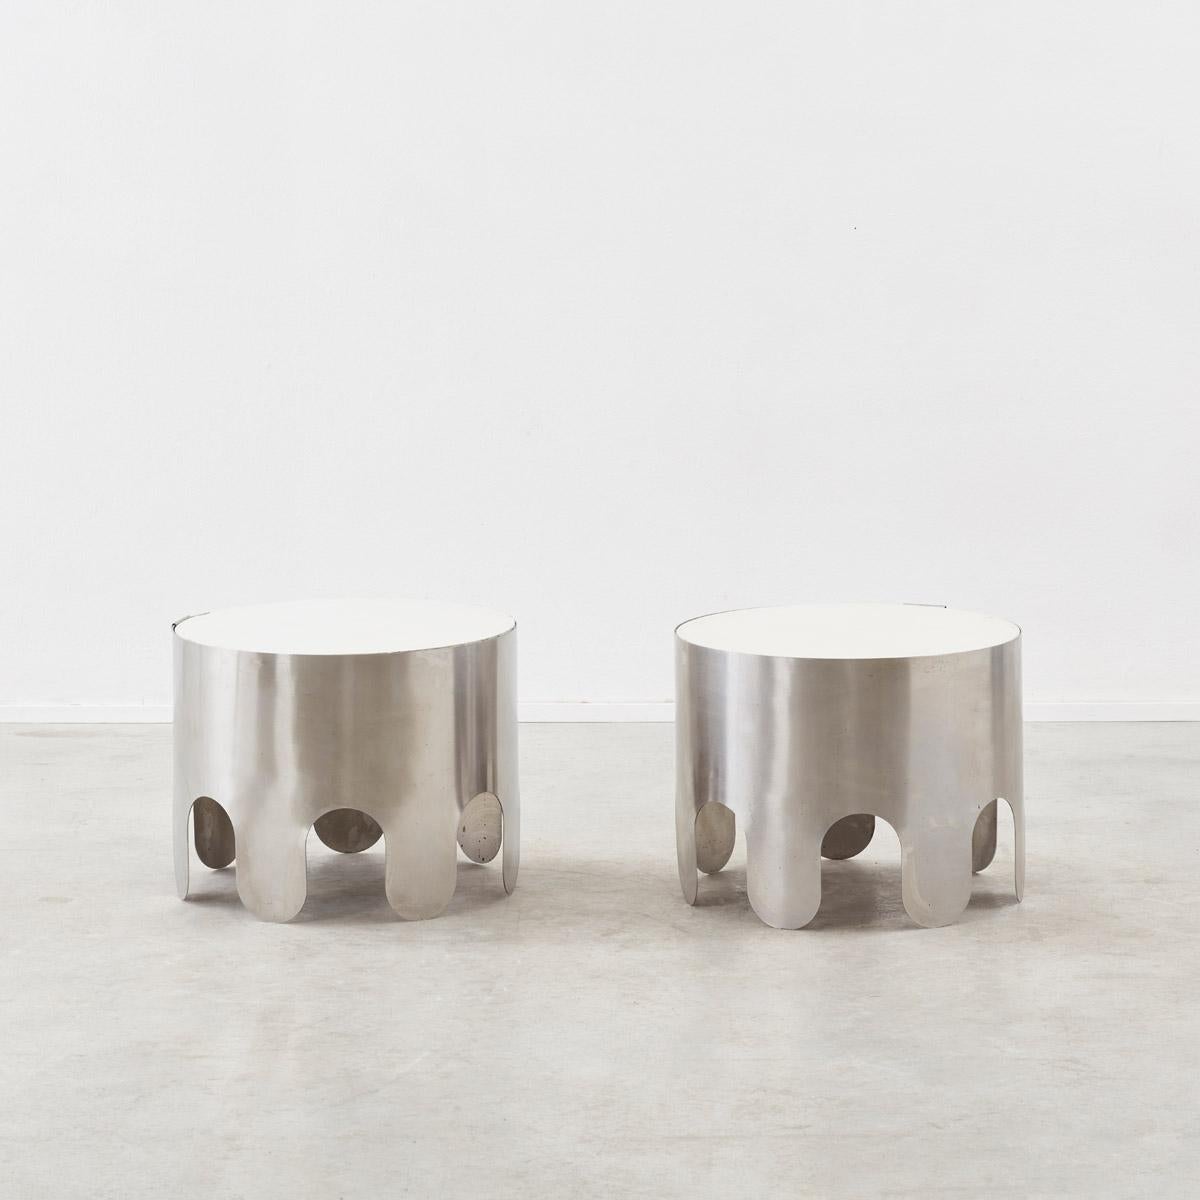 A pair of playful round brushed steel side tables, elegantly balancing soft curves with a more industrial aesthetic. The gentle undulating bases form feet, giving the illusion of waves. The cylindrical metal bases hold off-white resin tabletops,